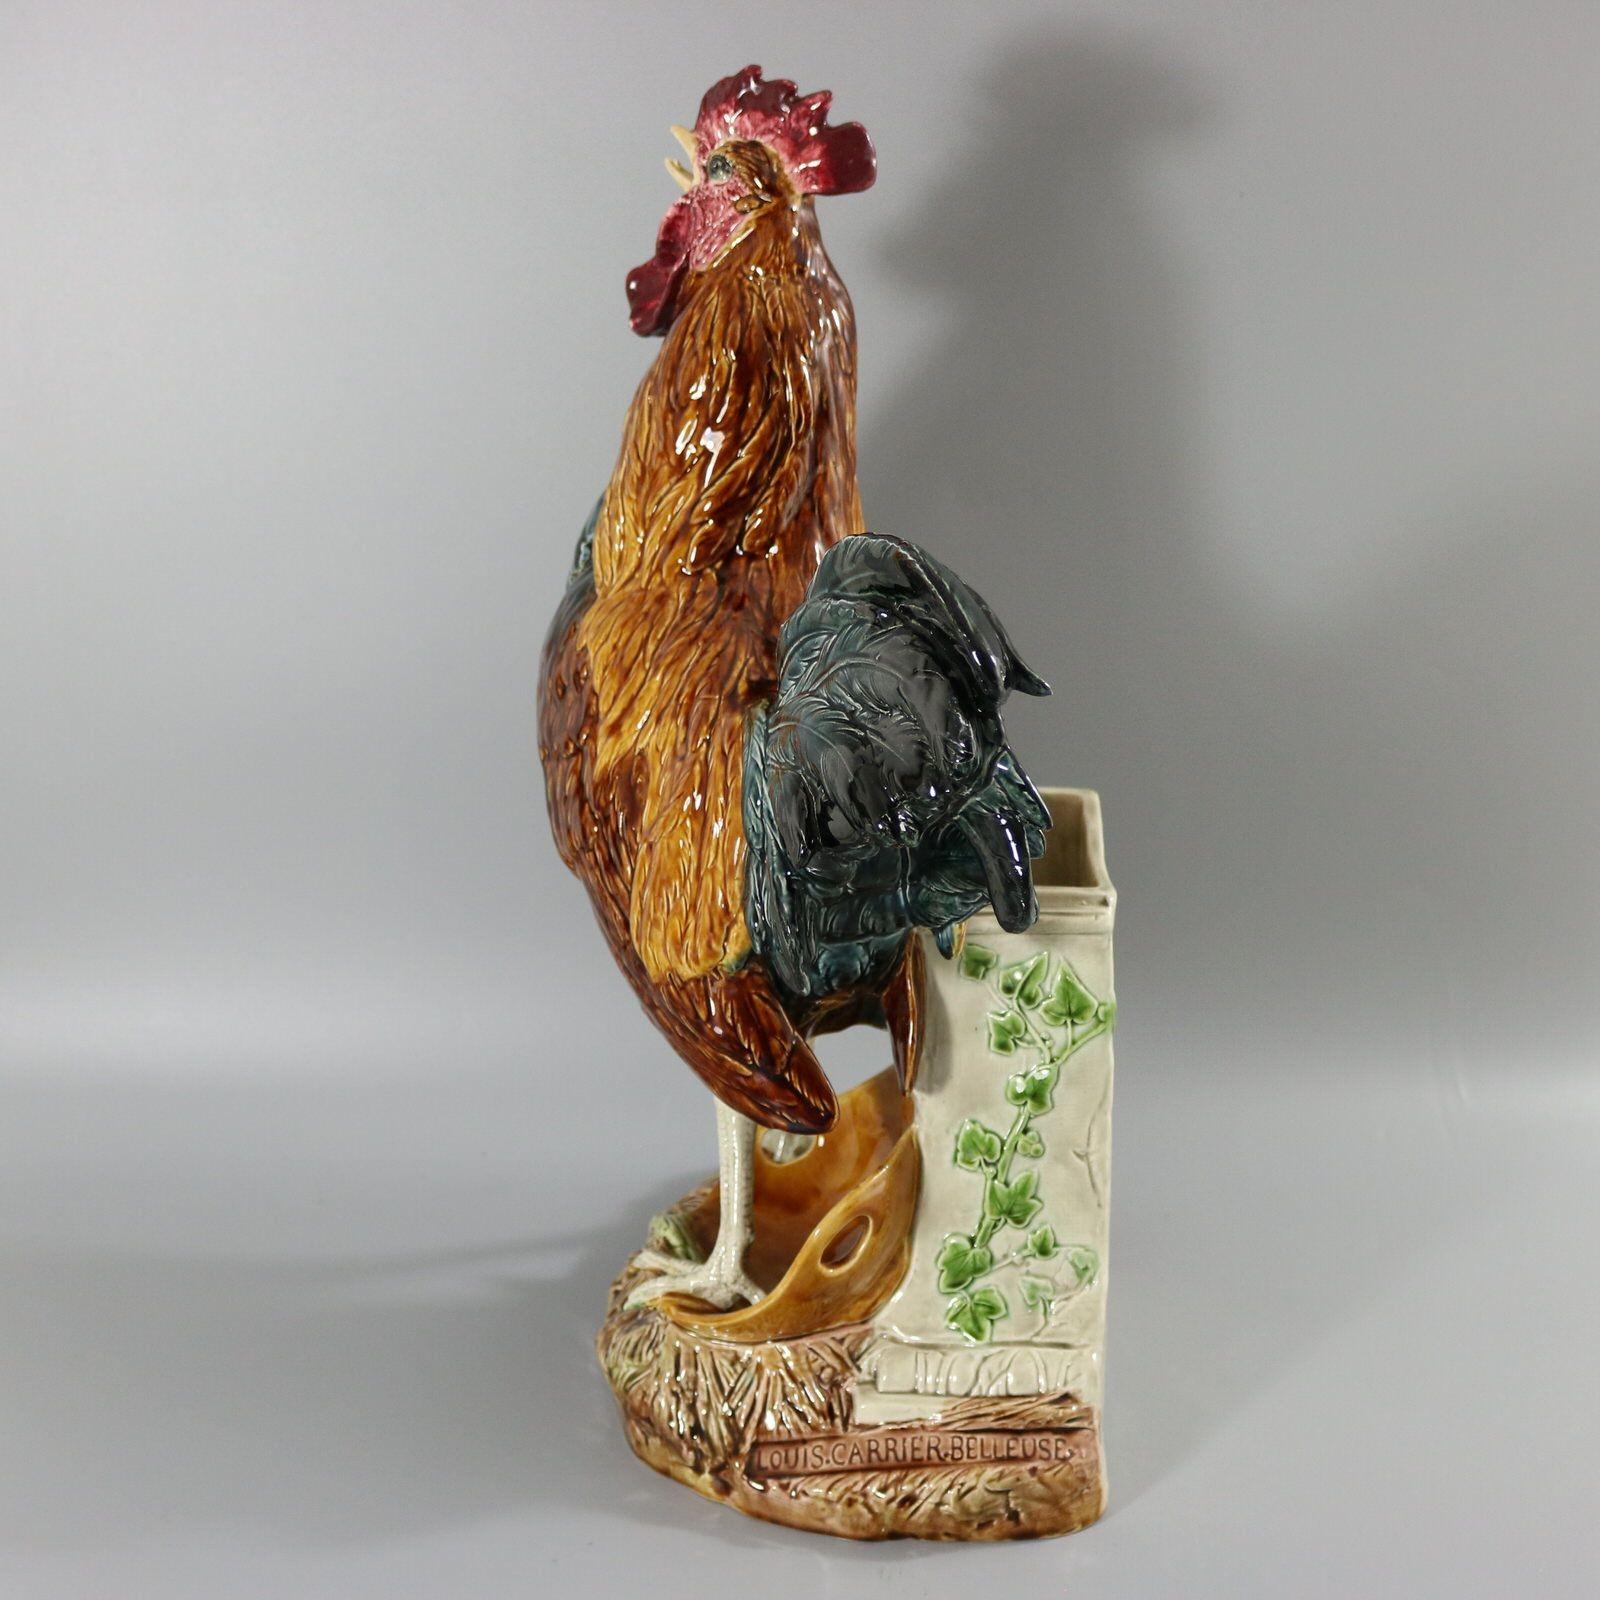 Choisy Majolica figural vase which features an animated cockerel / rooster stood on a basket, in front of a stone wall. Ivy grows up the wall. Colouration: light brown, brown, blue/grey, are predominant. The piece bears maker's marks for the Choisy